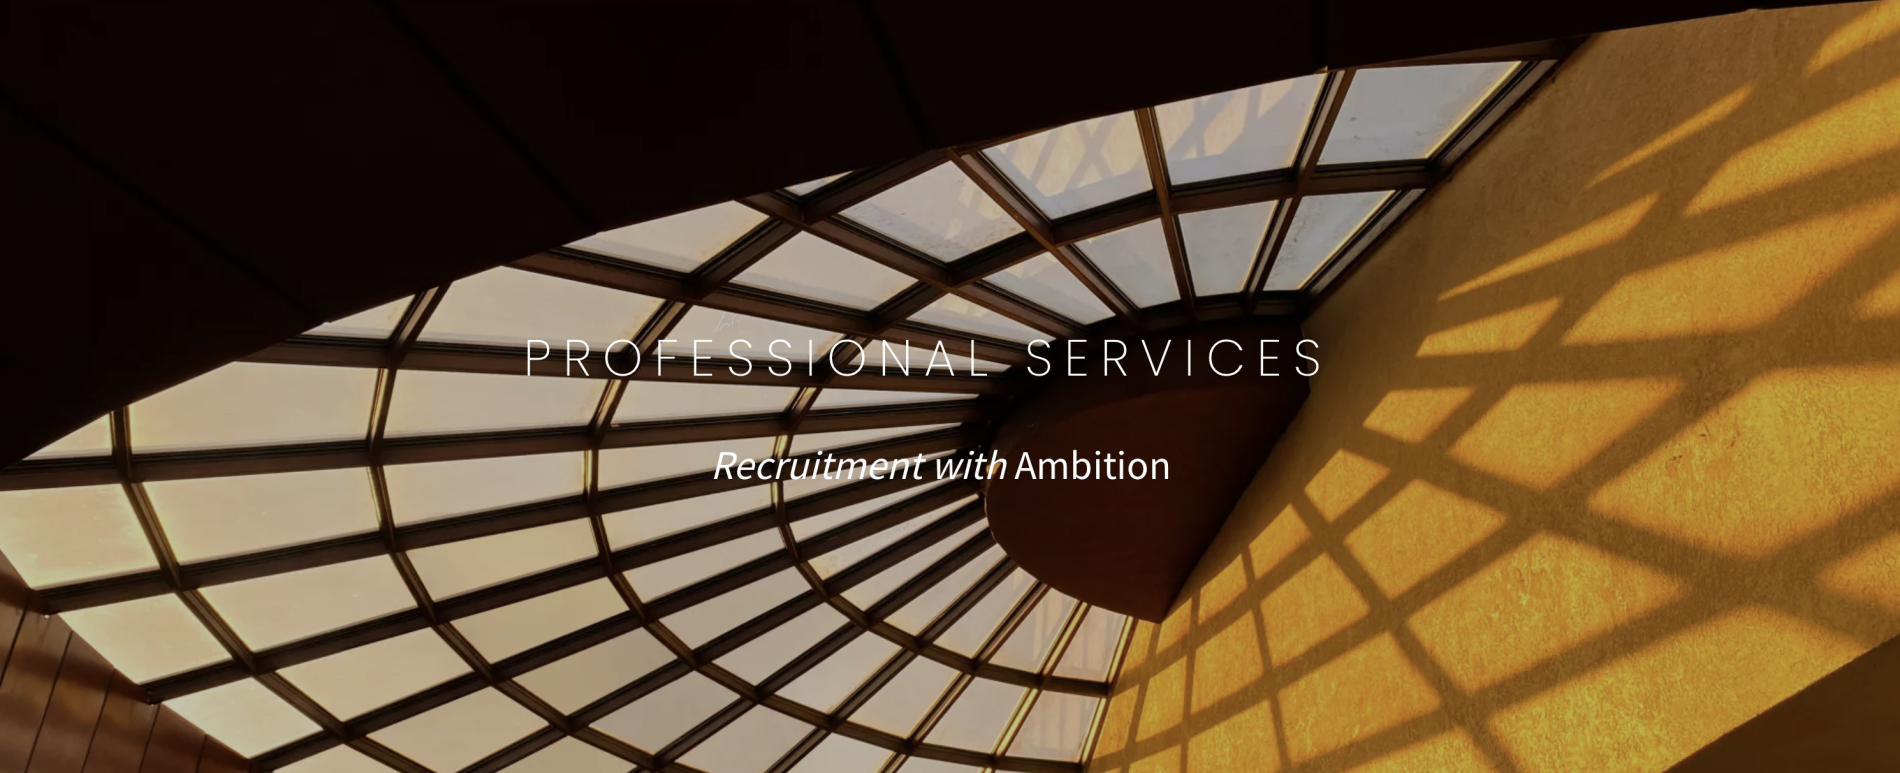 Professional services home page